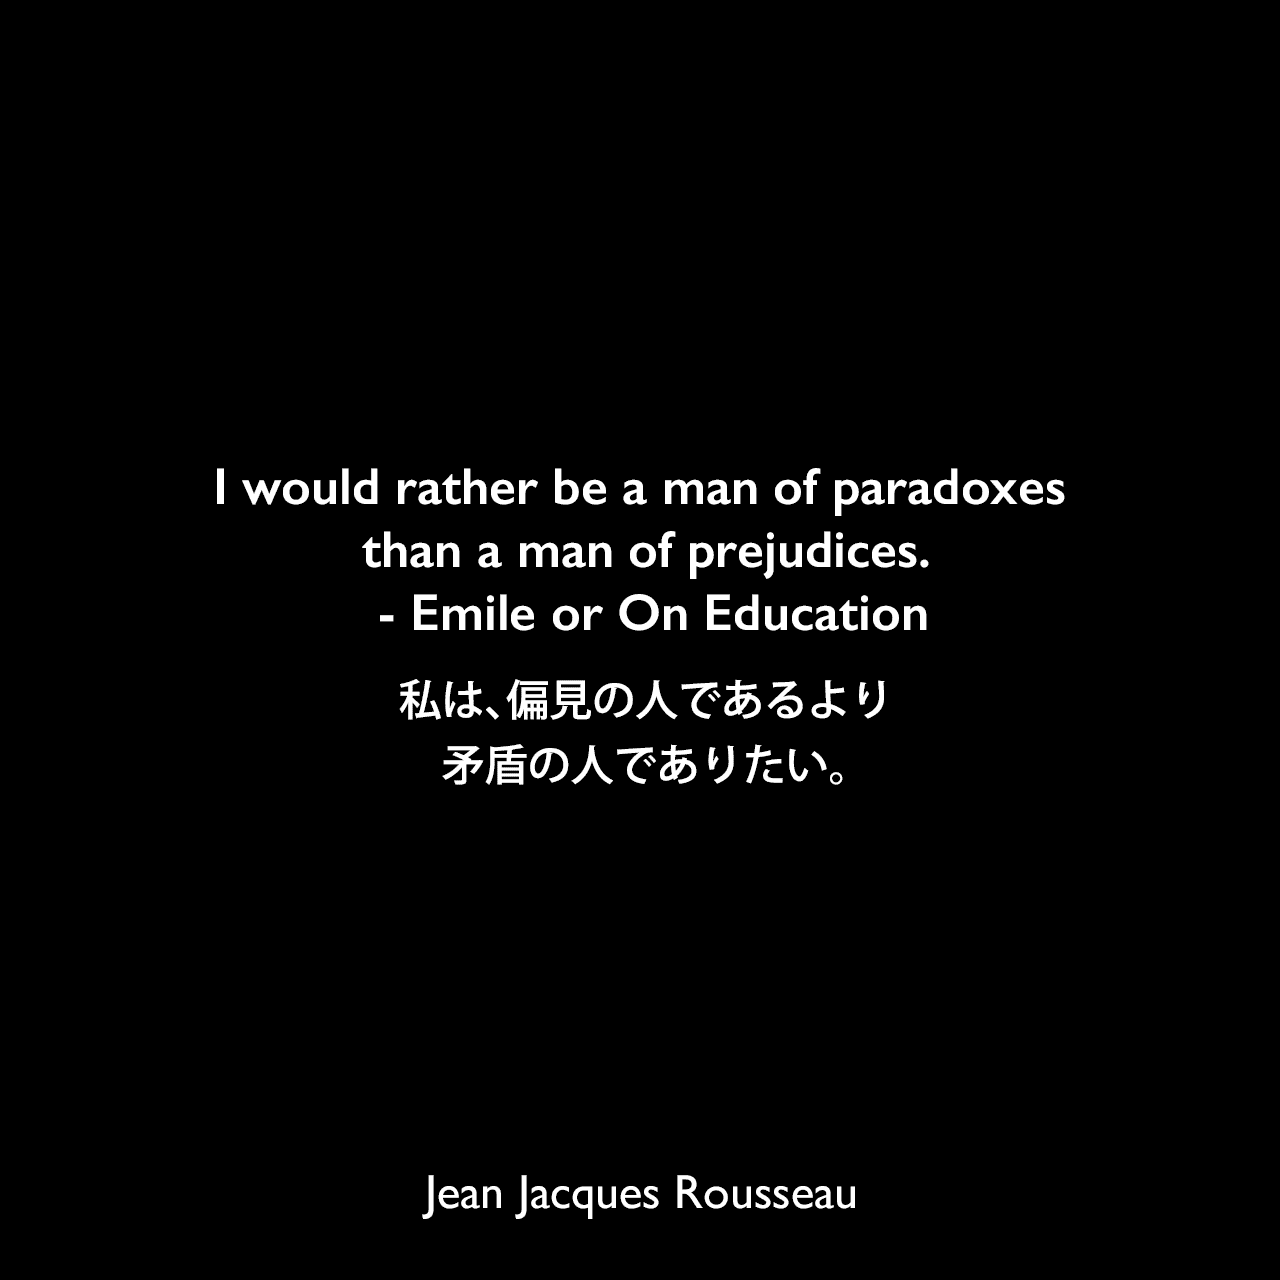 I would rather be a man of paradoxes than a man of prejudices. - Emile or On Education私は、偏見の人であるより矛盾の人でありたい。Jean Jacques Rousseau